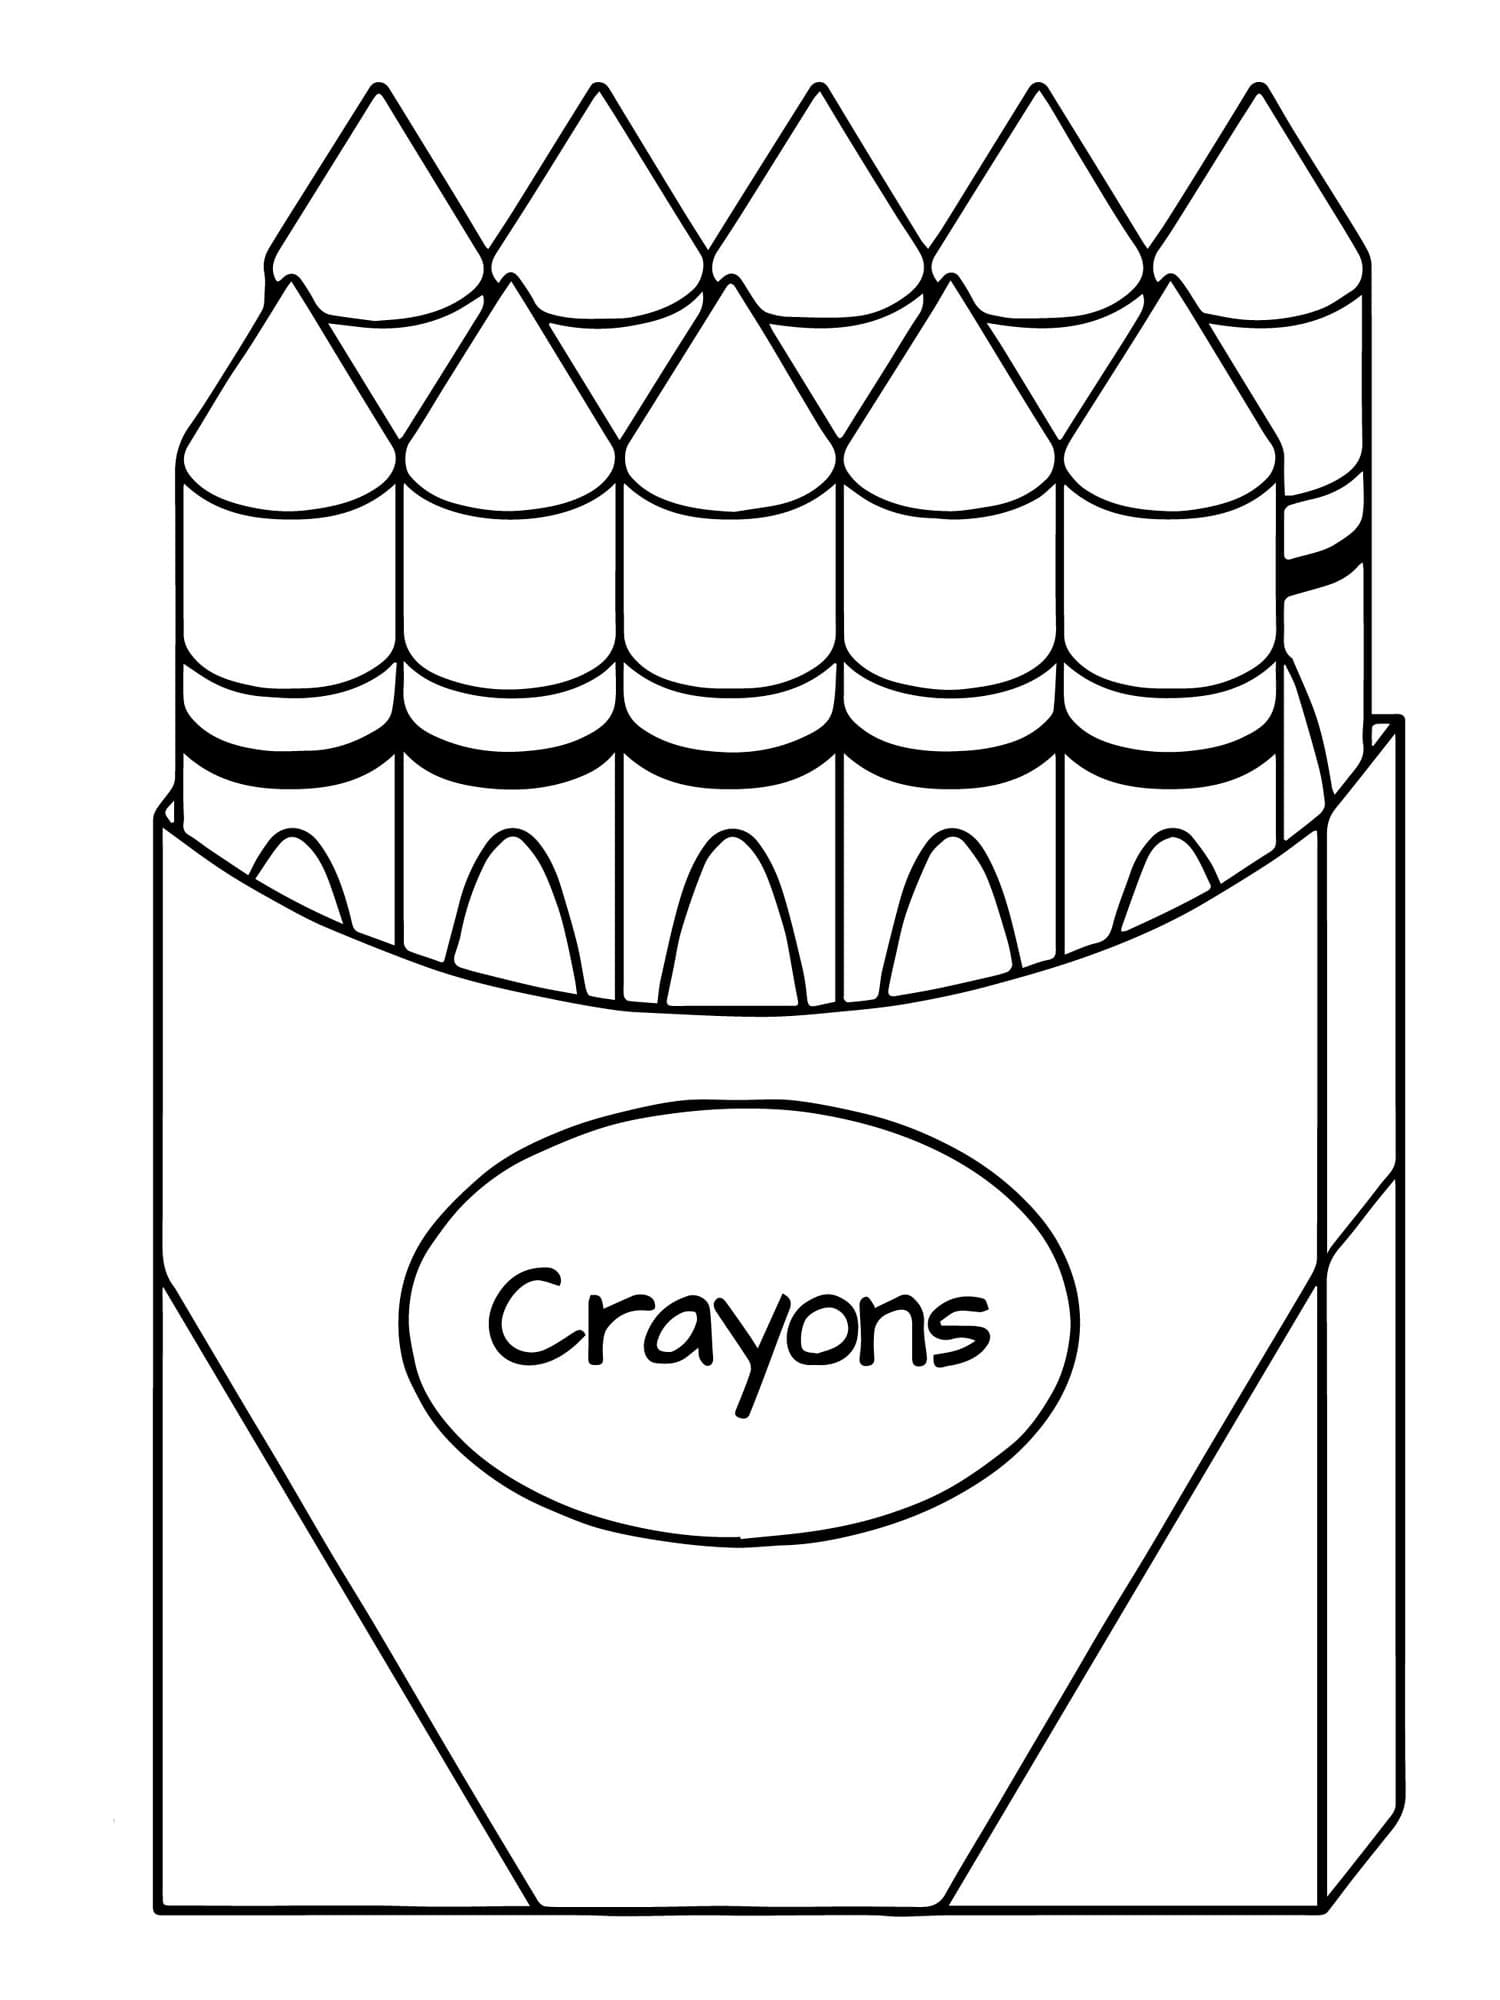 crayon-coloring-pages-free-printable-coloring-pages-for-kids